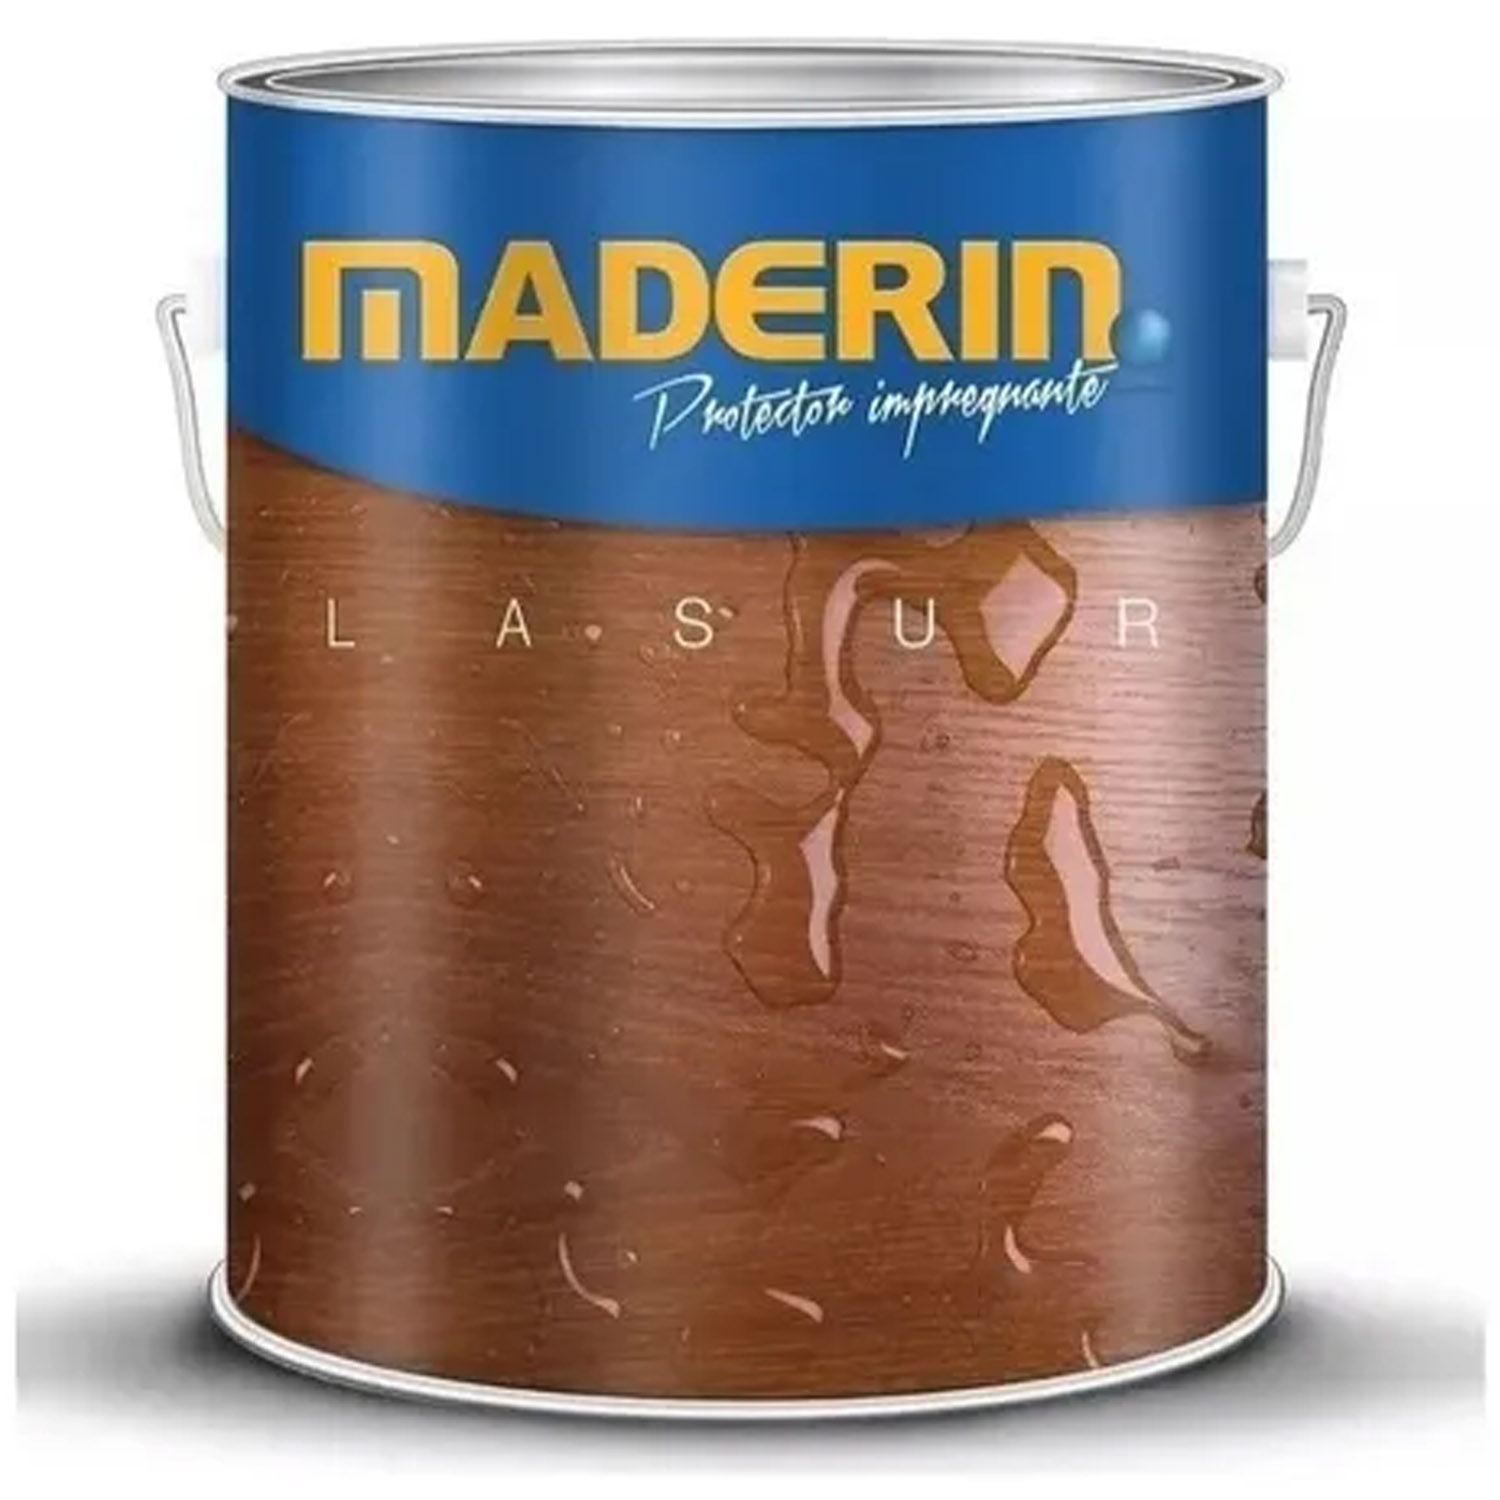 MADERIN LASUR ROBLE CL 1 LTS